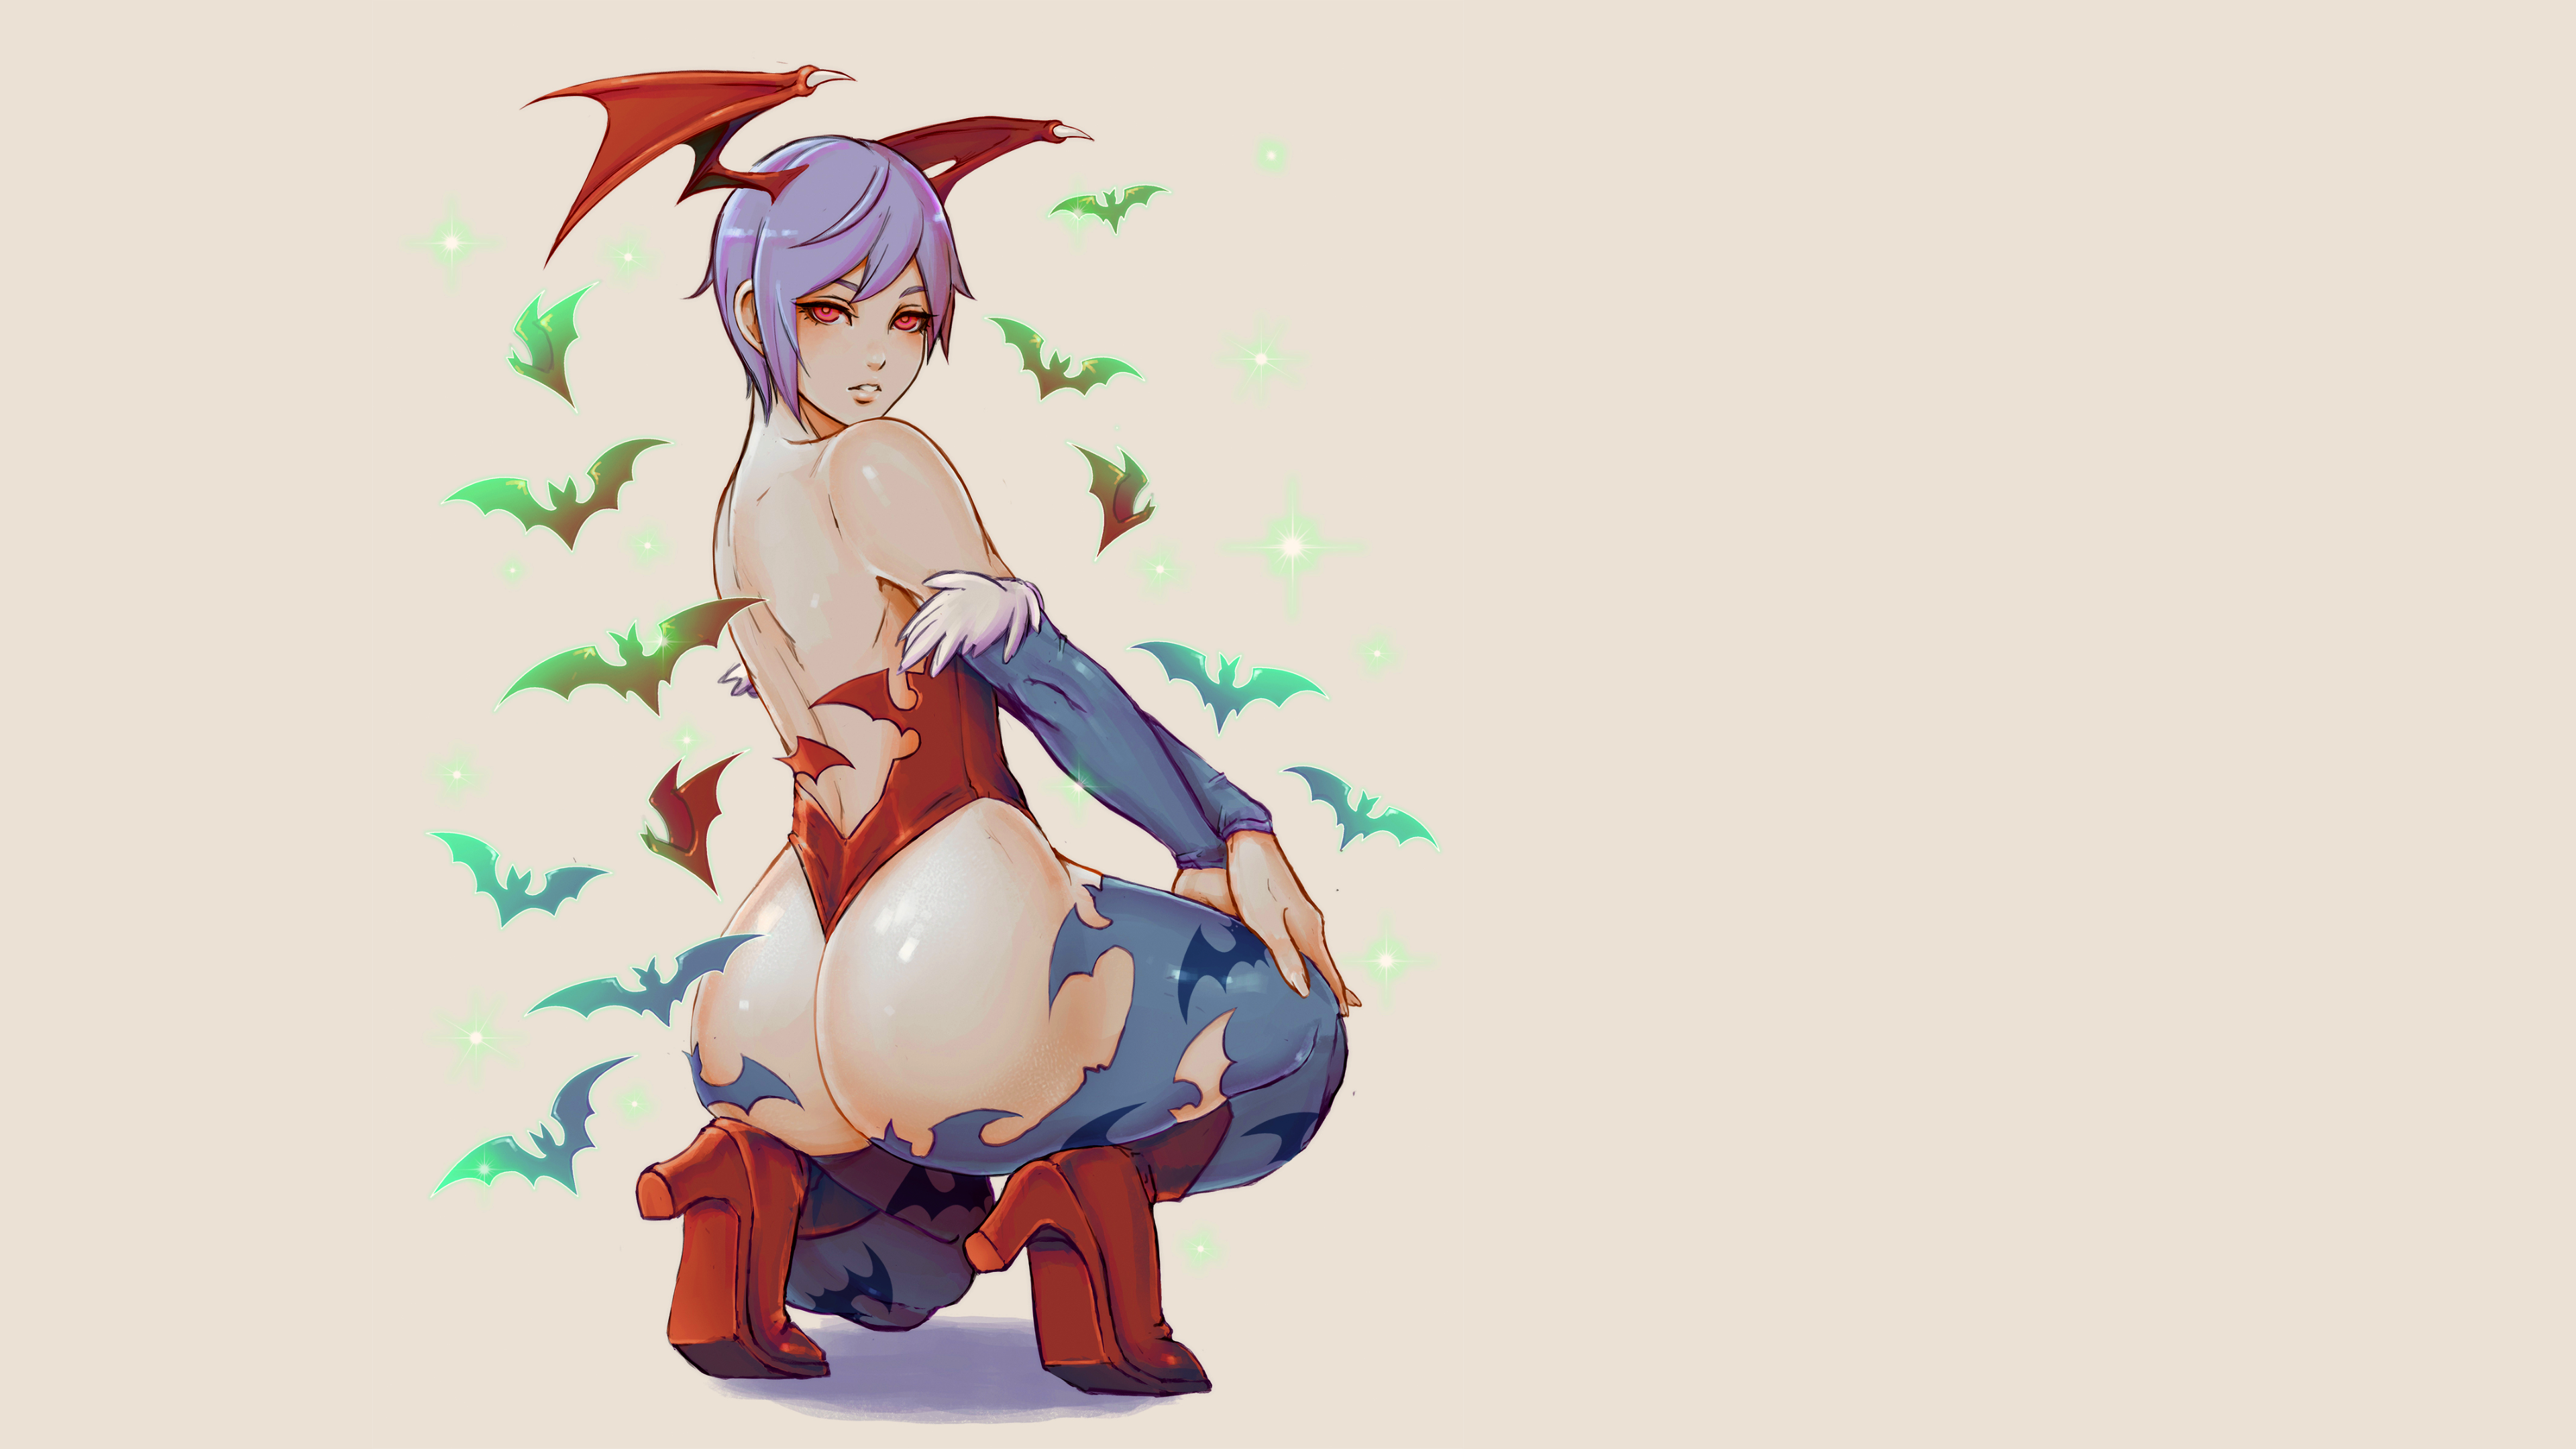 Anime 3840x2160 Darkstalkers Lilith Aensland (Darkstalkers) bats vampires heels thigh-highs pantyhose corset red corset wings bat wings bare shoulders arm warmers red eyes ass red shoes purple hair short hair colorful back video games Capcom fighting games white background video game girls